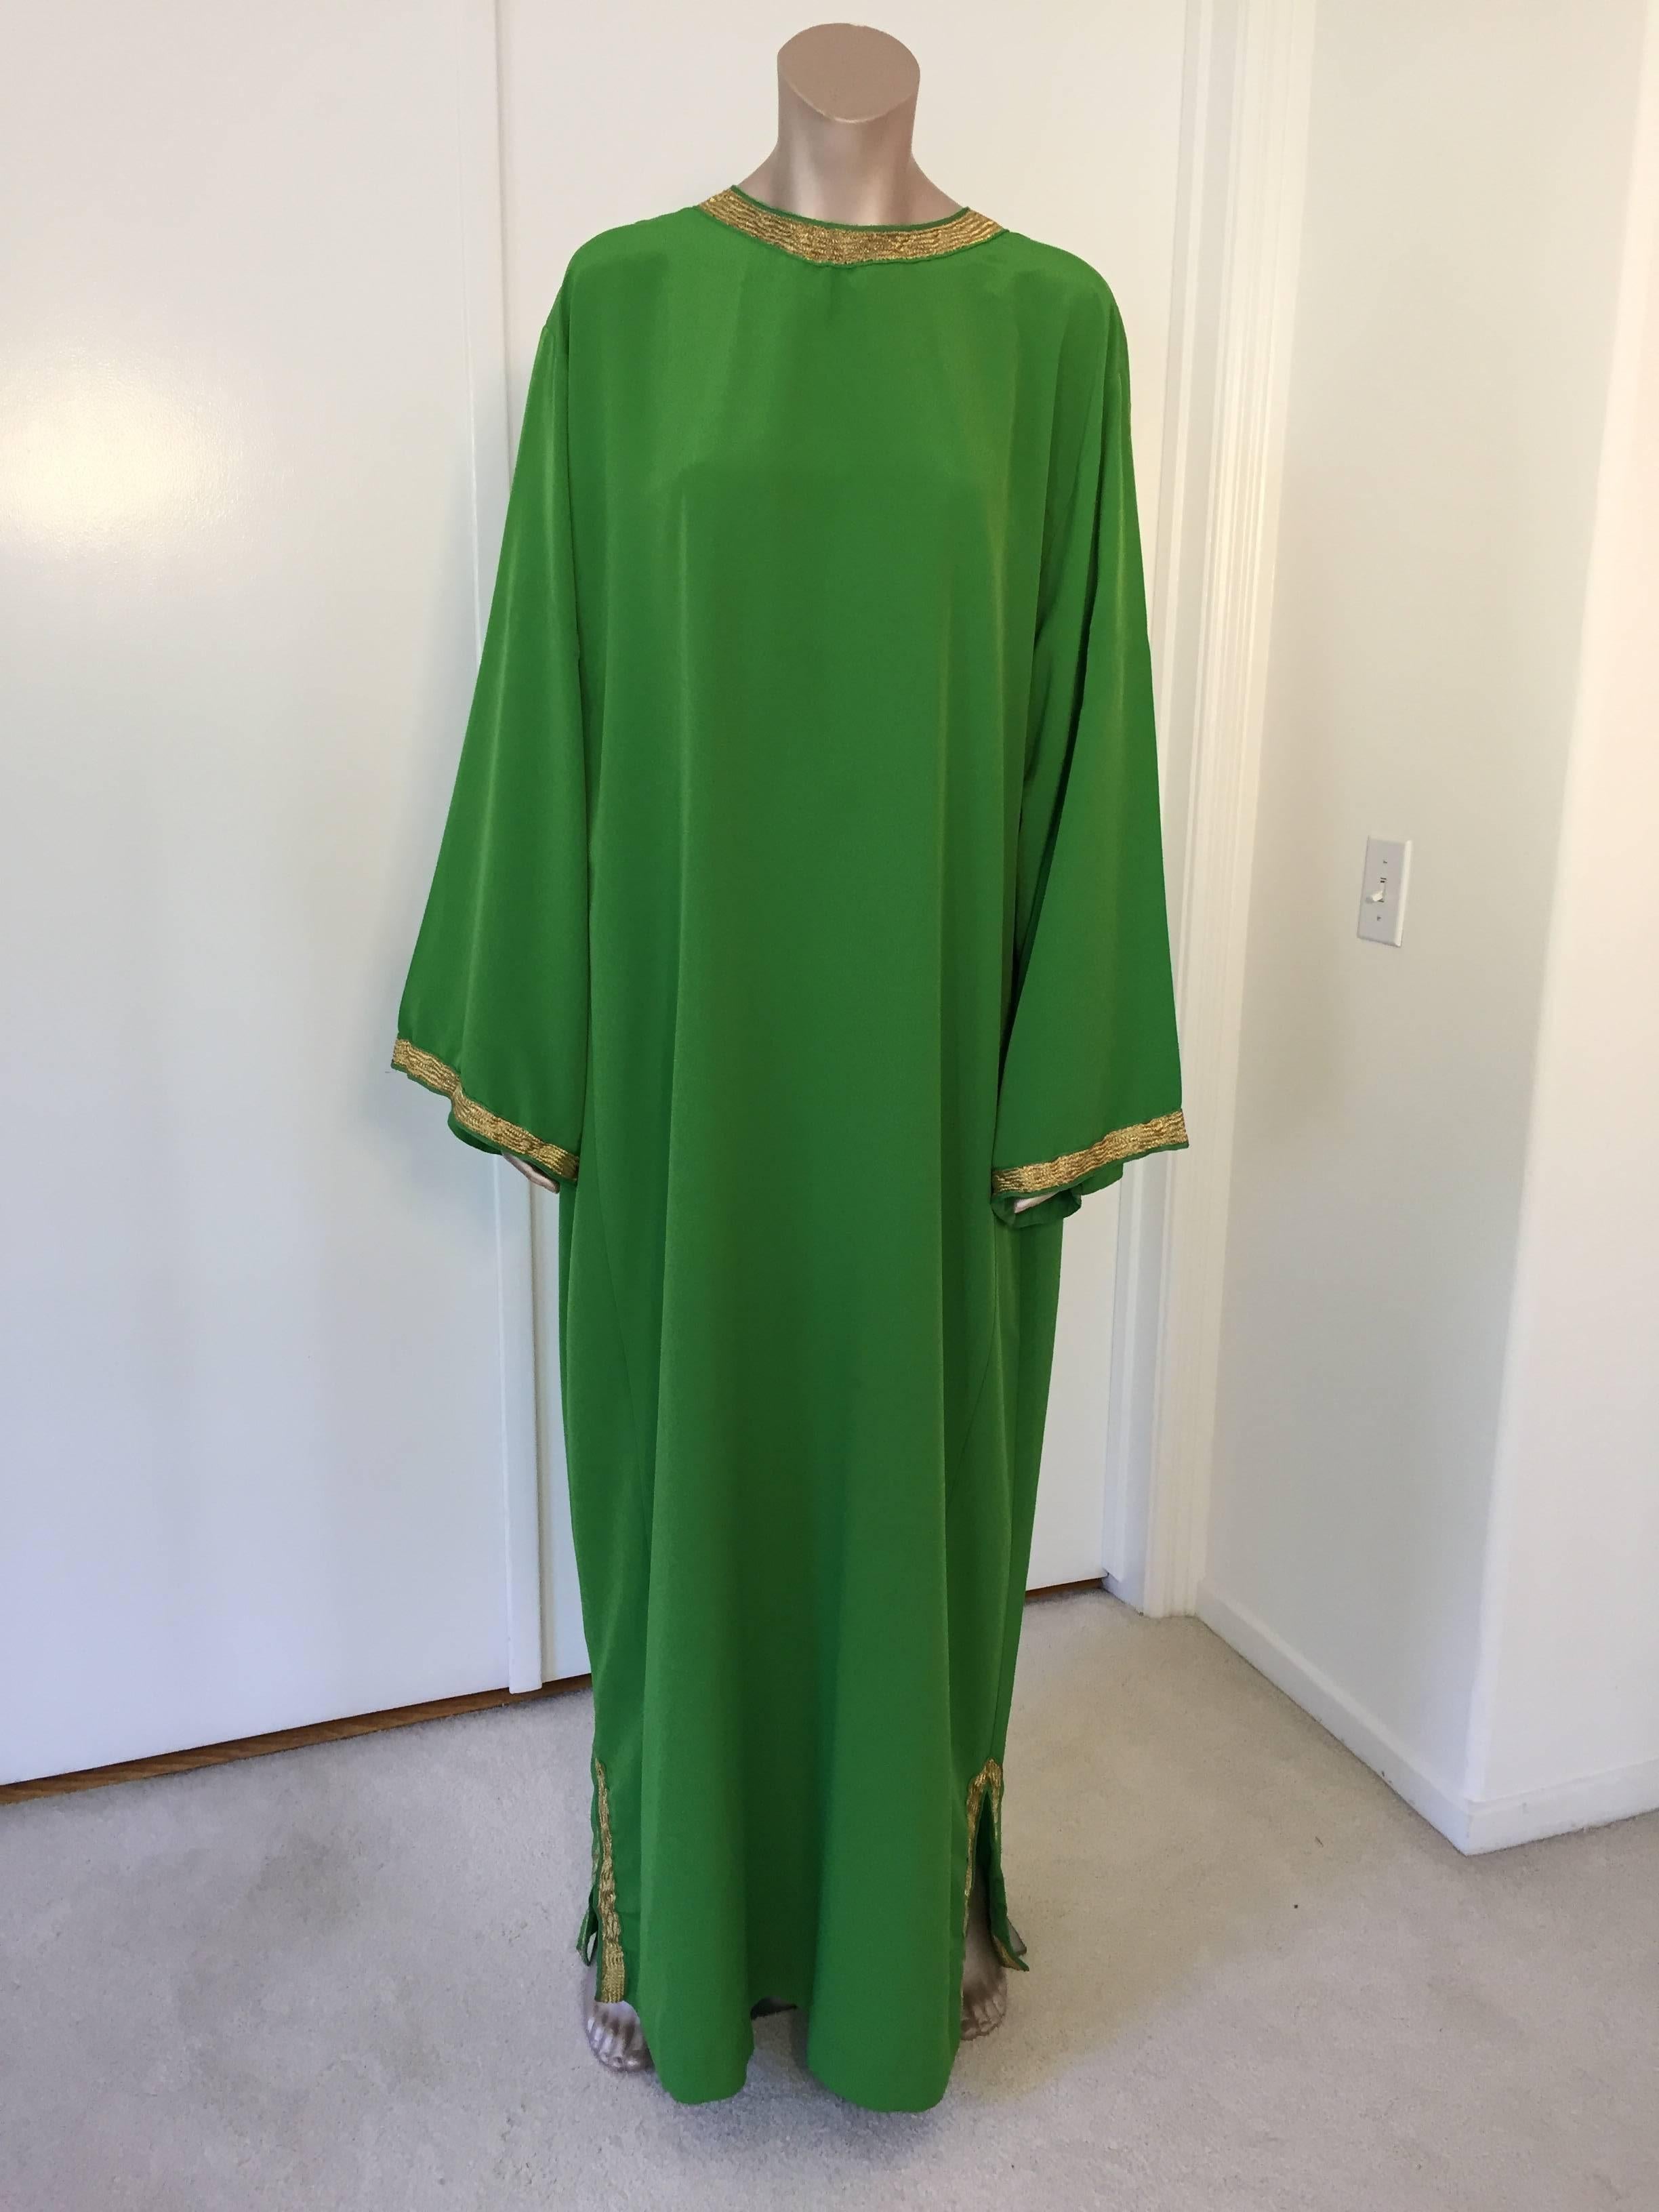 Moroccan Emerald Green Lace and Gold Trim Caftan Set 1